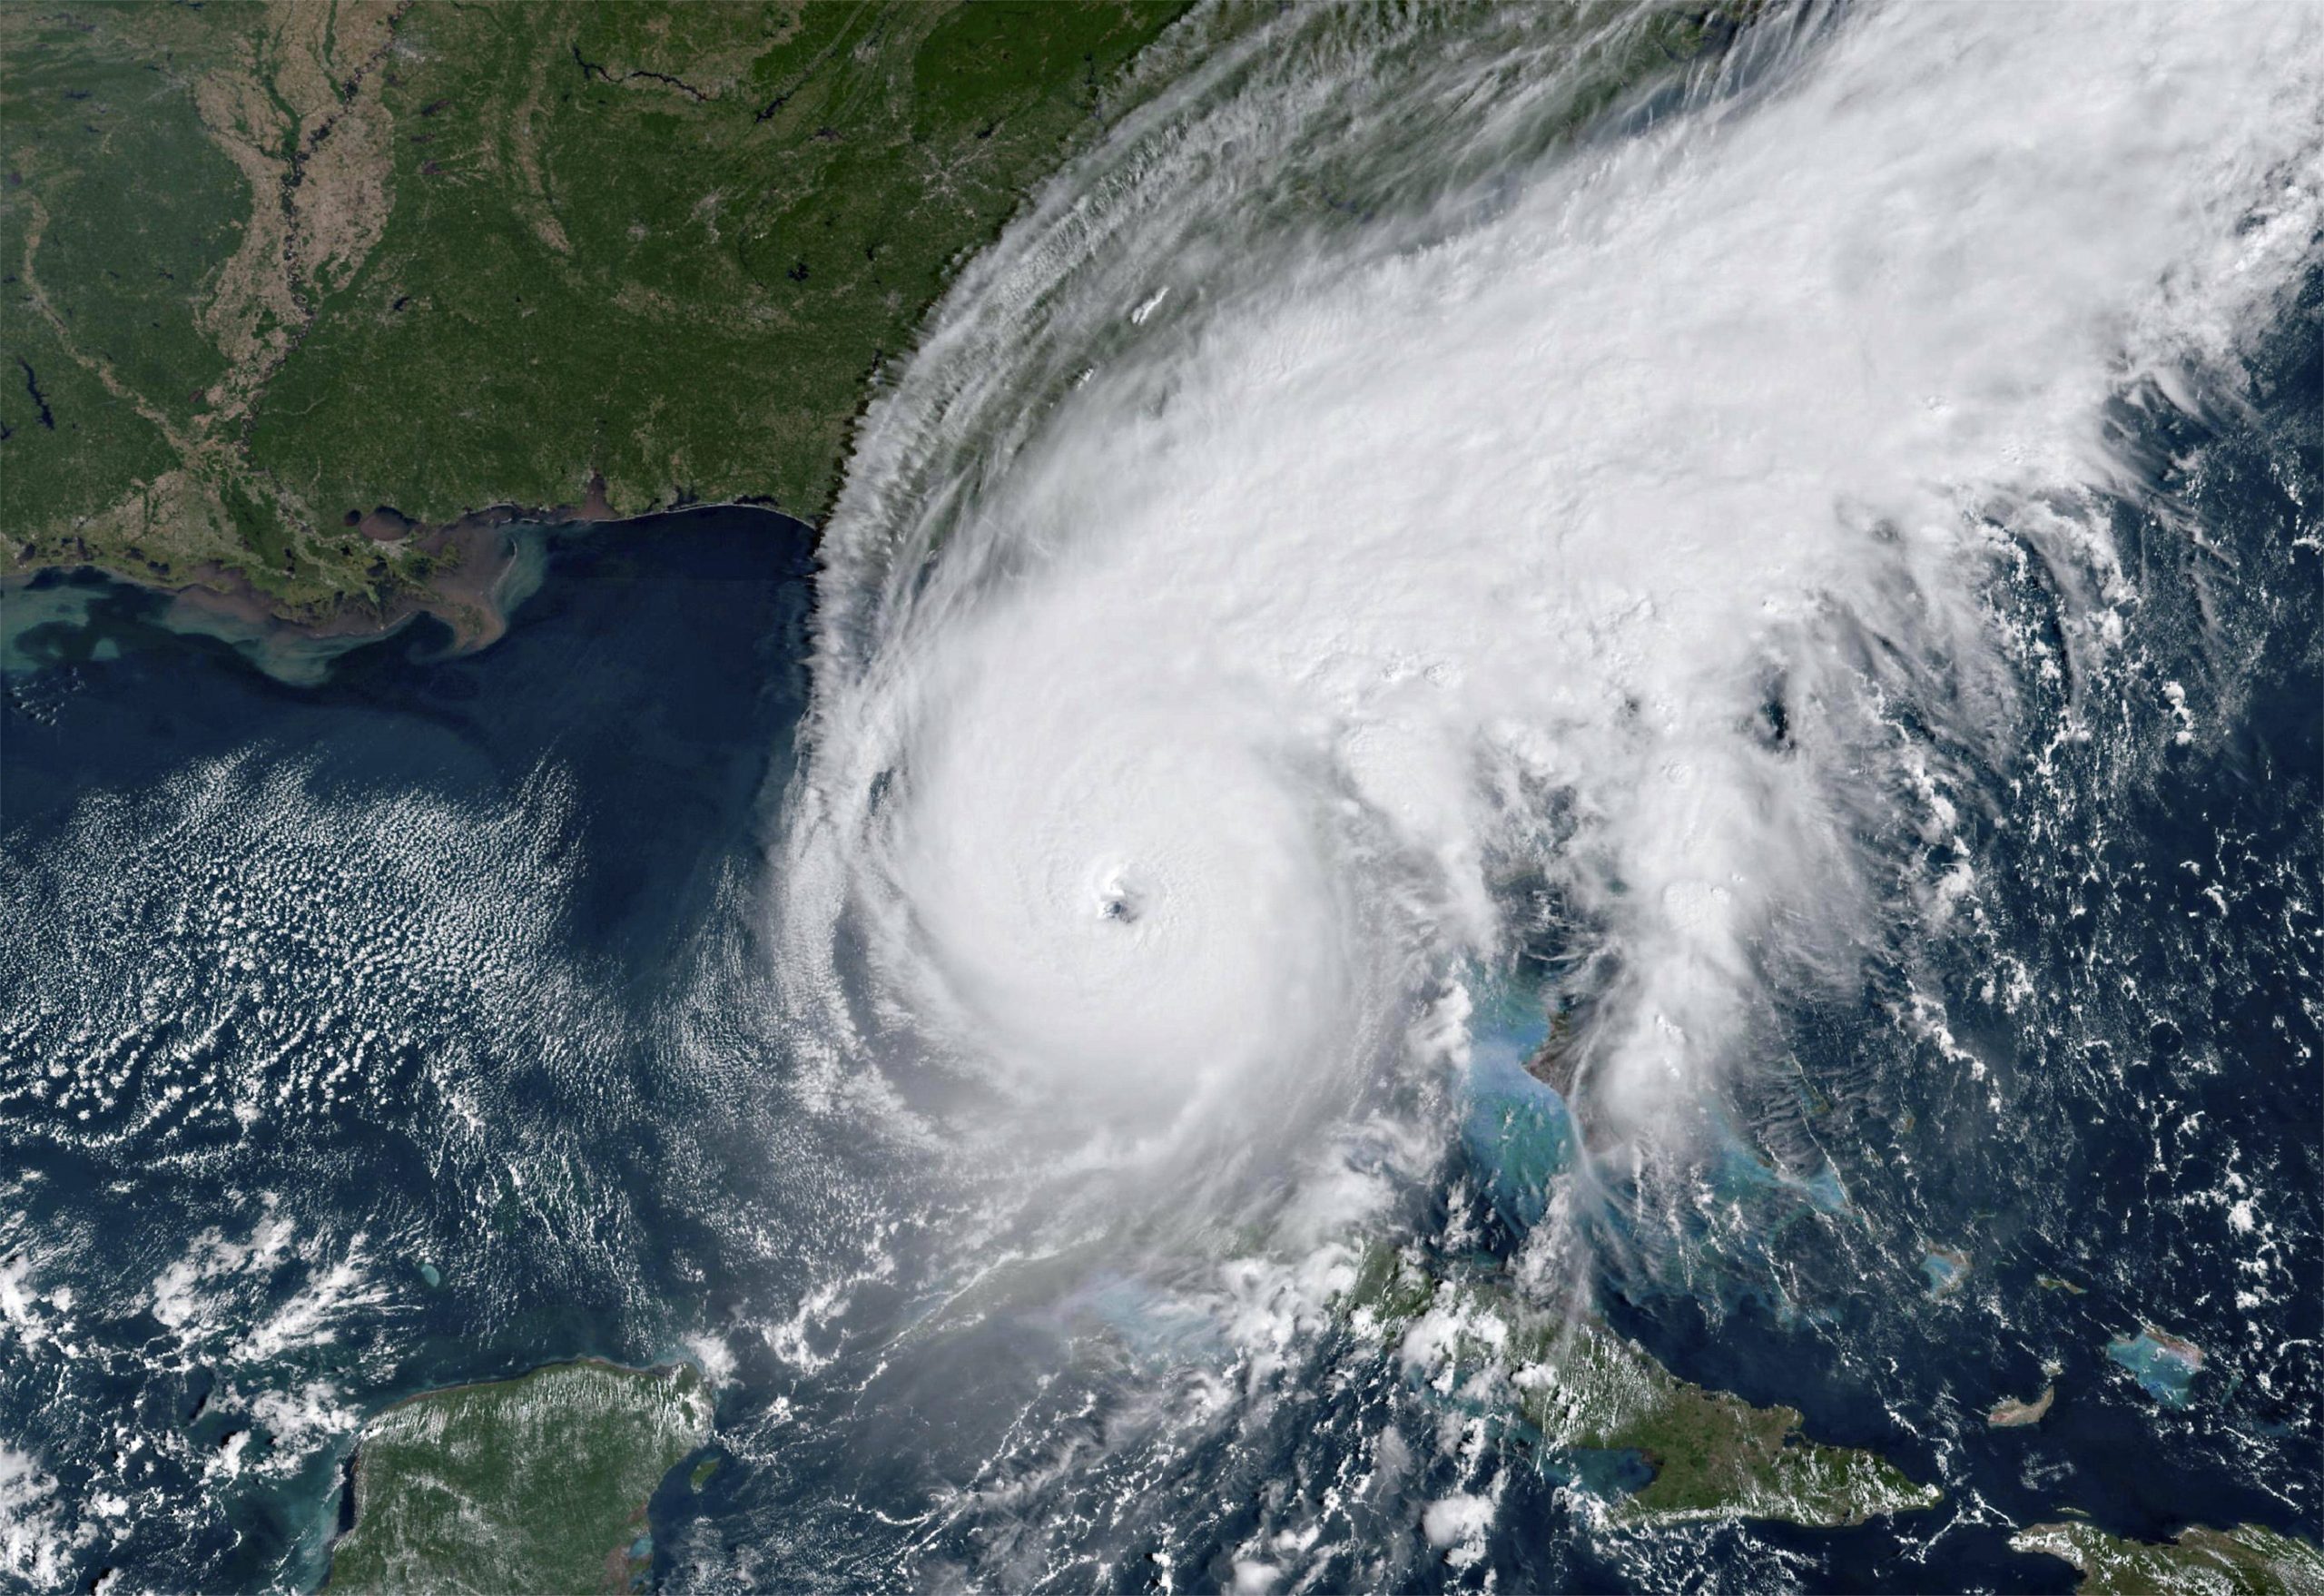 September 28, 2022, NASA EOSDIS, EARTH ORBIT: View of Hurricane Ian as the eye wall comes ashore at Fort Meyers Florida on the west coast of Florida as a Category 4 dangerous storm as seen from the NASA EOSDIS satellite, September 28, 2022 in Earth Orbit. NASA EOSDIS EARTH ORBIT - ZUMAp138 20220928_zaa_p138_028 Copyright: xEosdis/Nasax